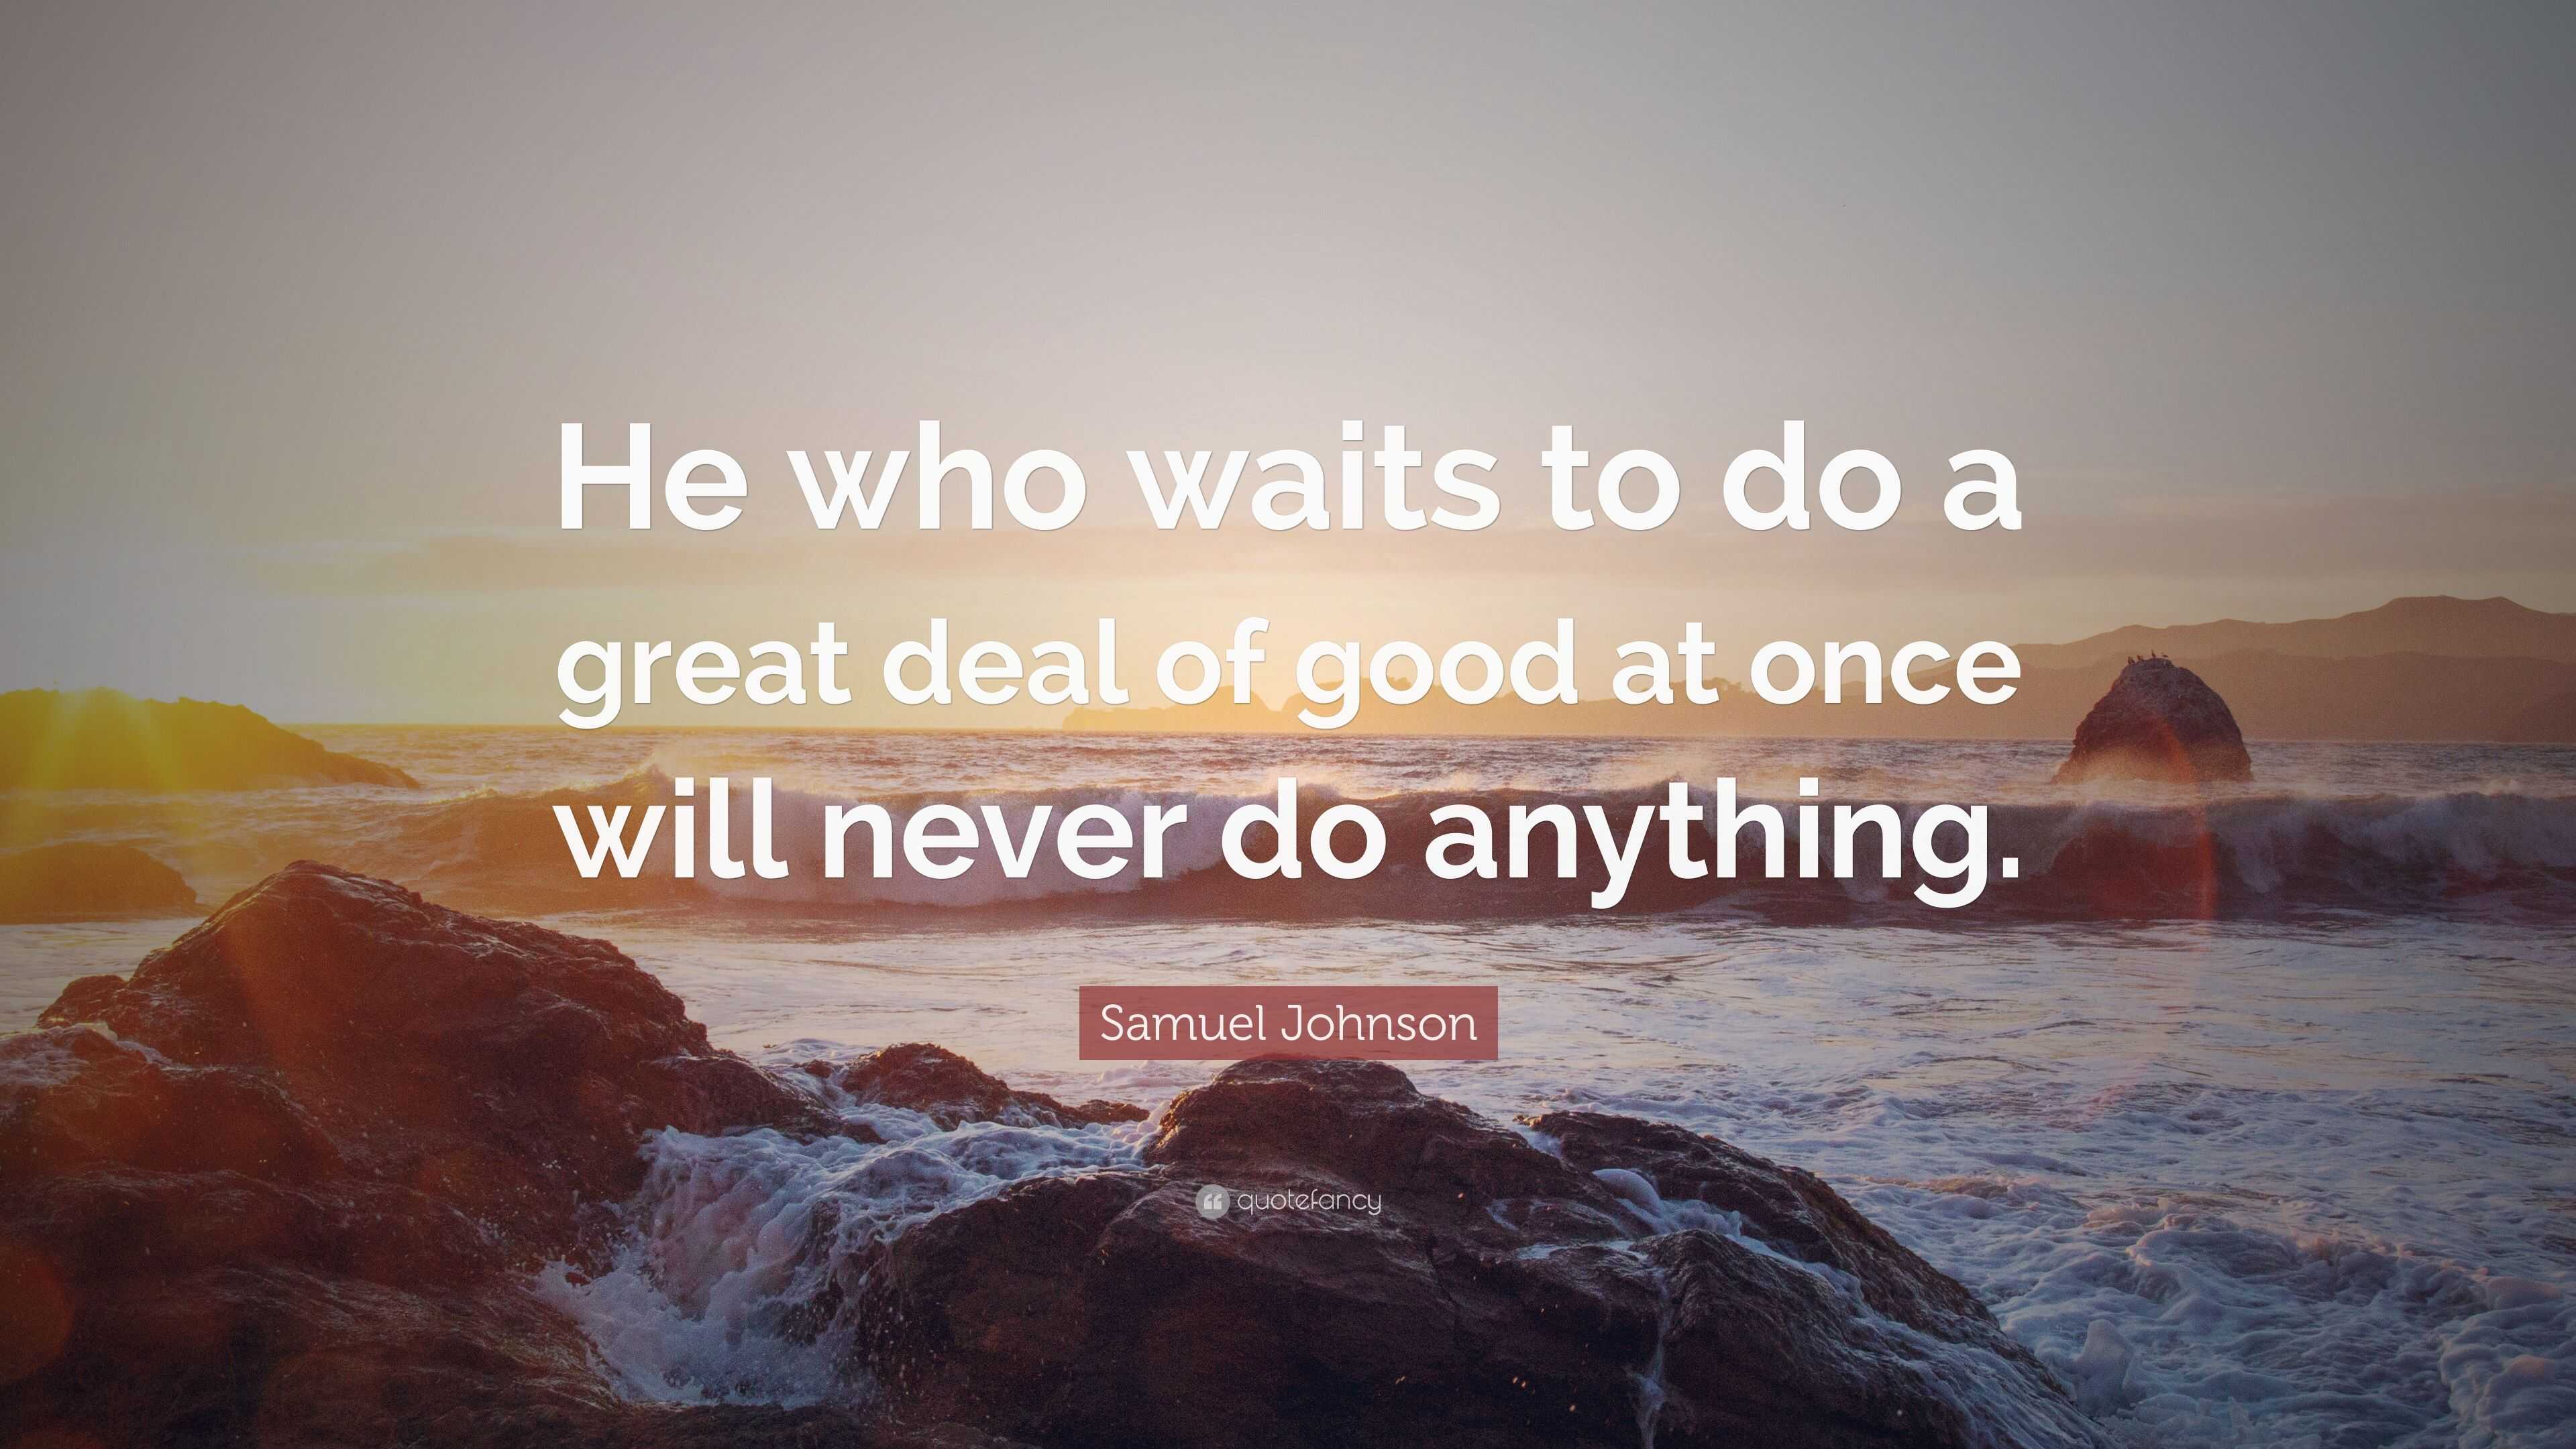 Samuel Johnson Quote: “He who waits to do a great deal of good at once